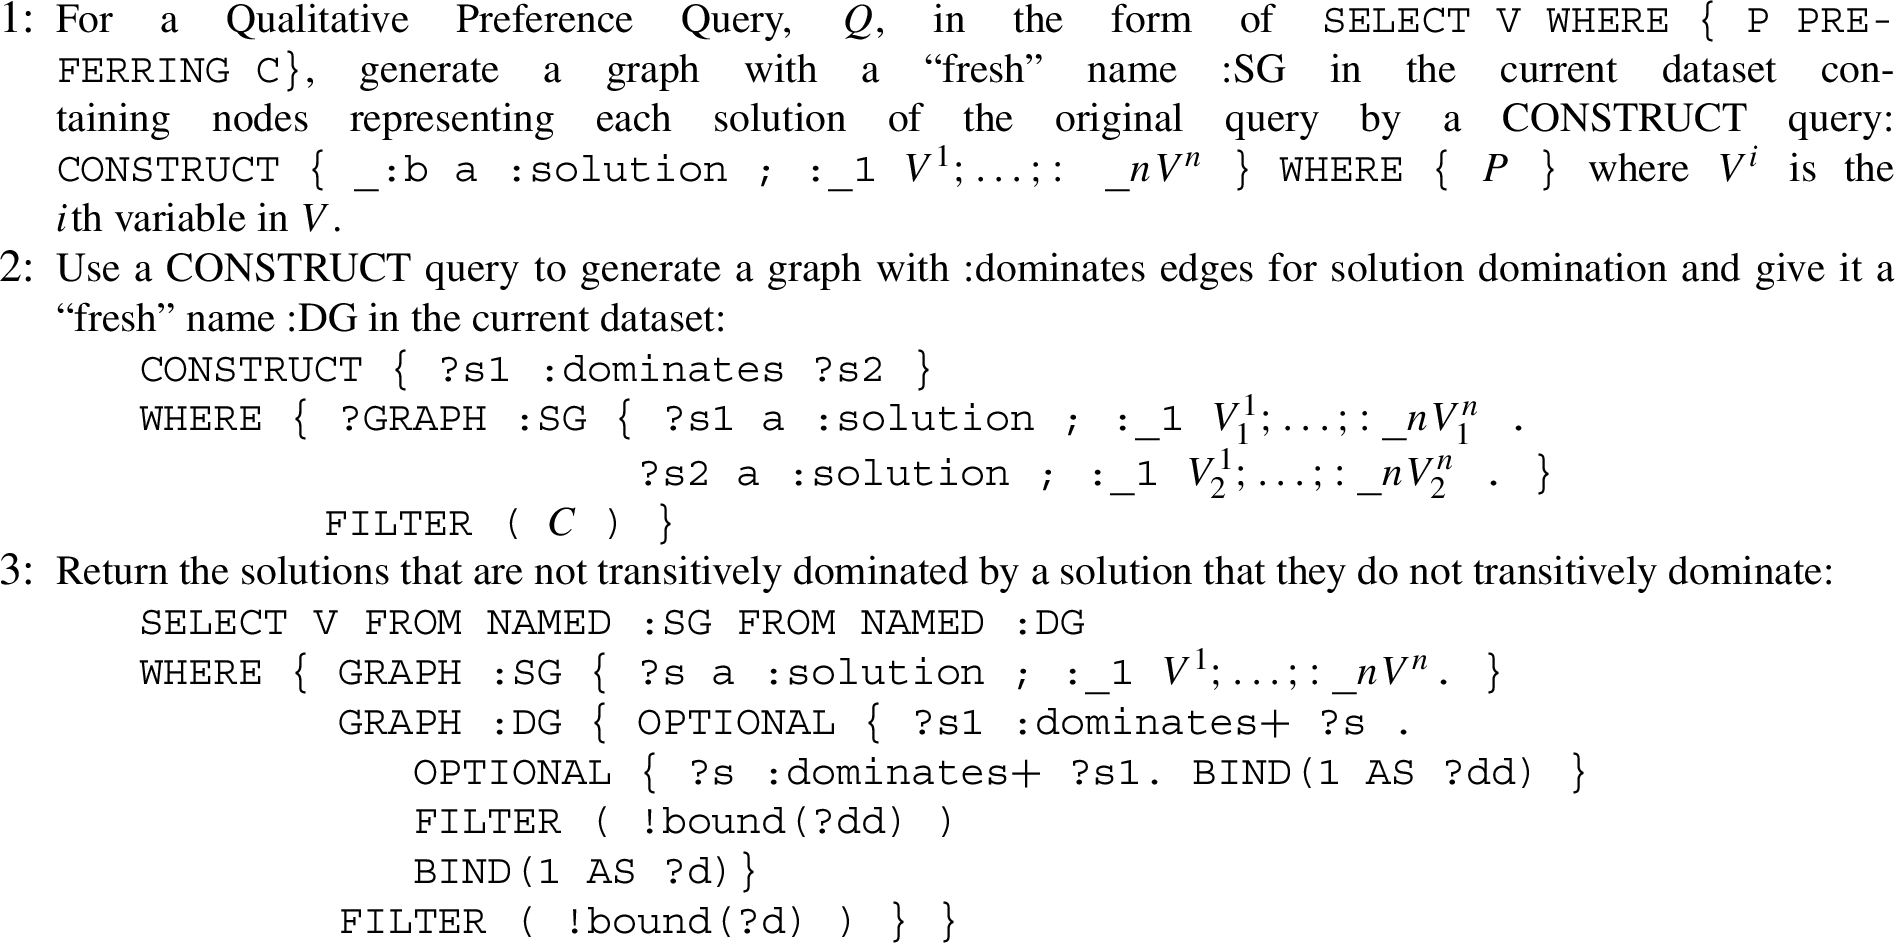 Extended qualitative preference query mapping, Q - qualitative preference query. Algorithm taken from Patel–Schneider and colleagues [41]